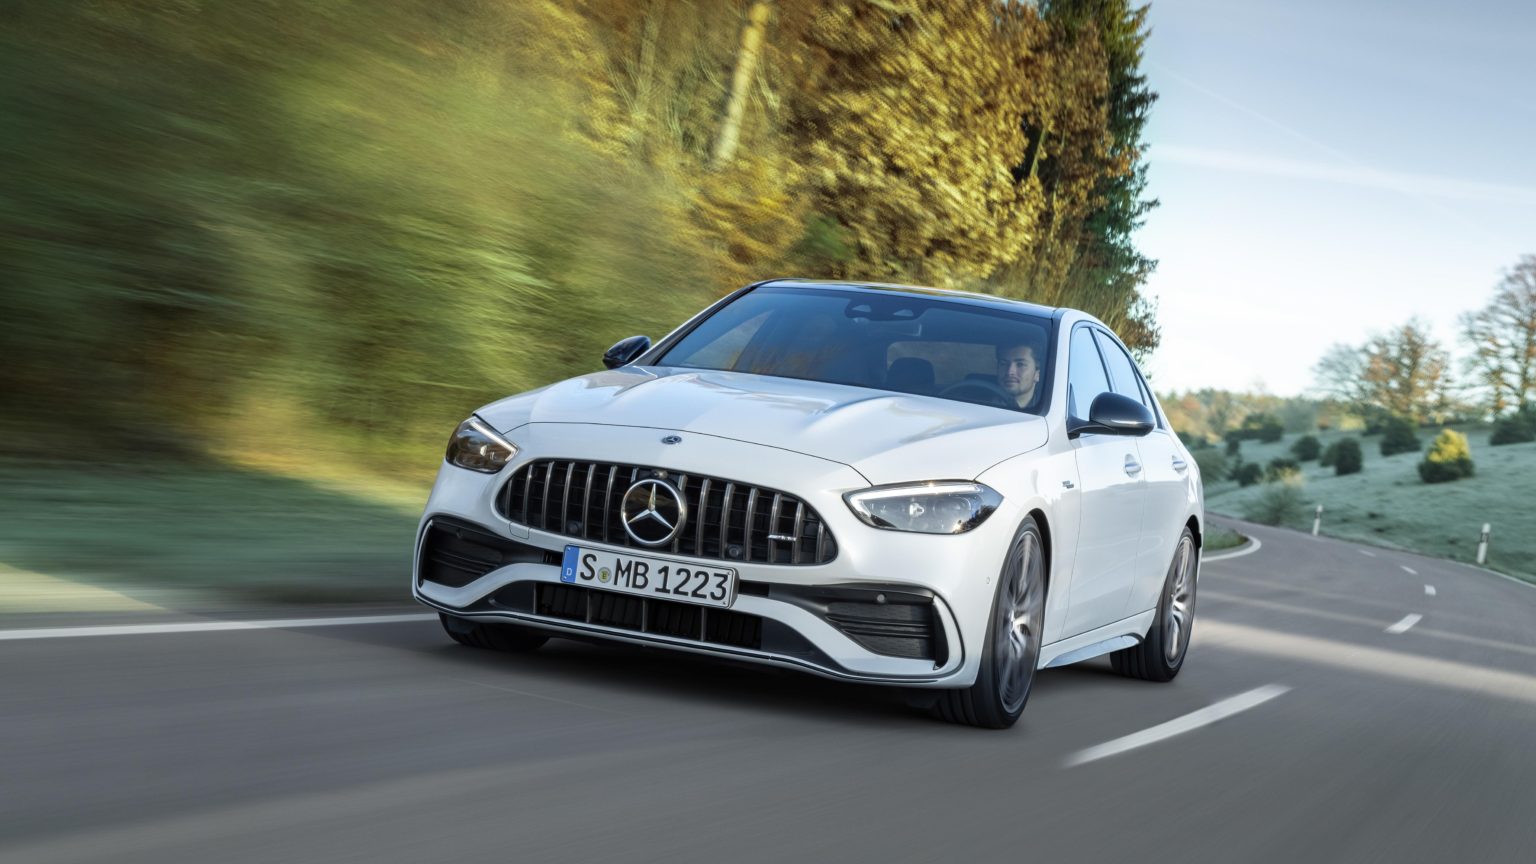 The new C 43 gets engine tech straight from Formula 1.